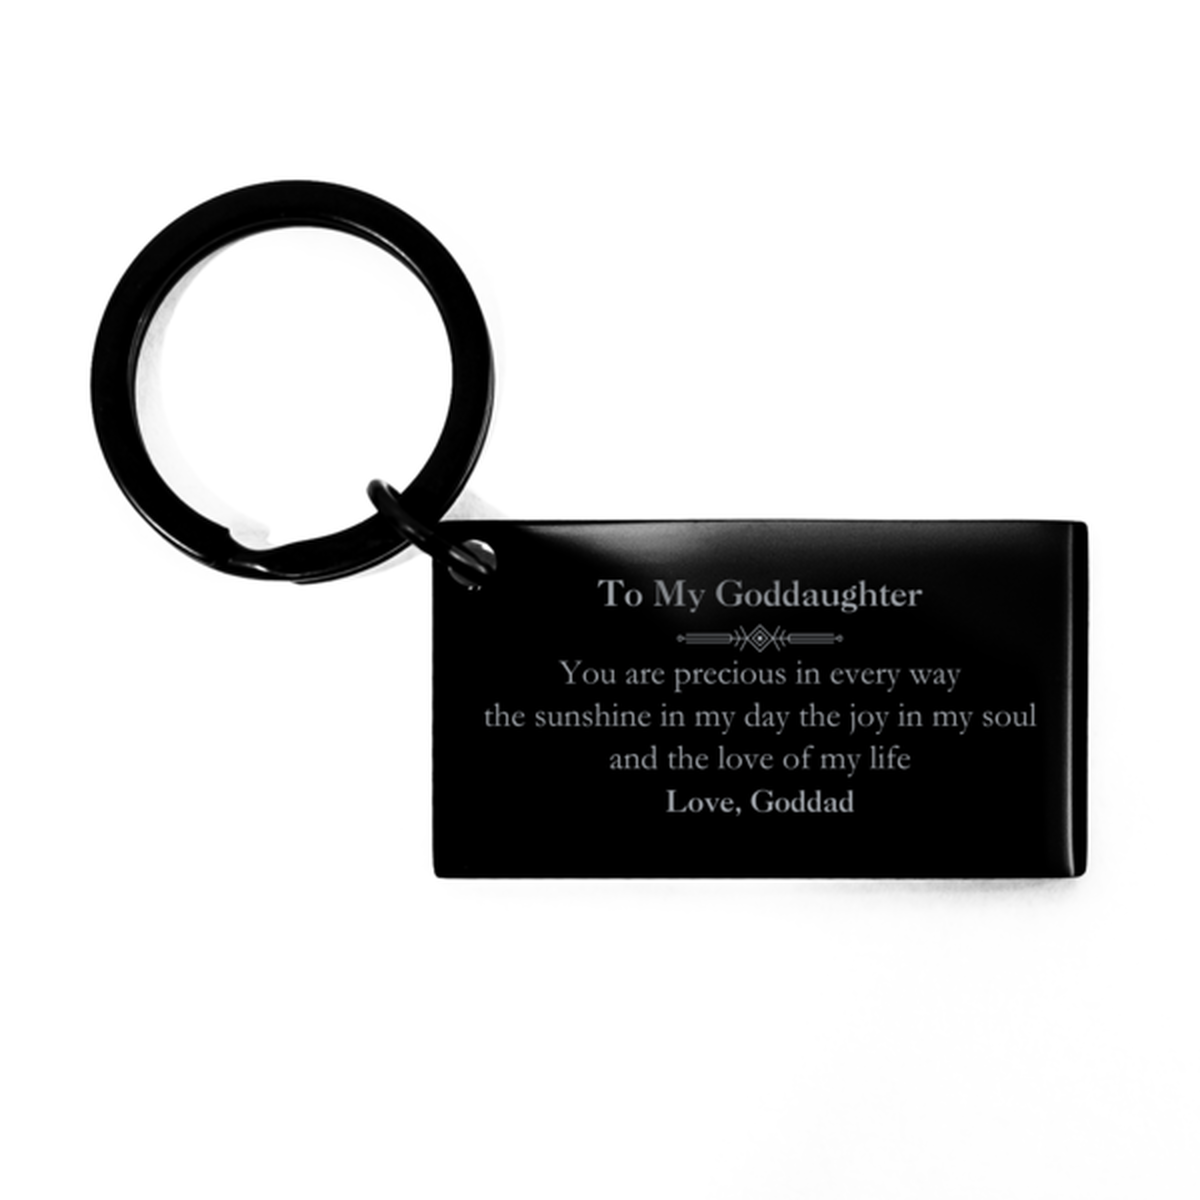 Graduation Gifts for Goddaughter Keychain Present from Goddad, Christmas Goddaughter Birthday Gifts Goddaughter You are precious in every way the sunshine in my day. Love, Goddad